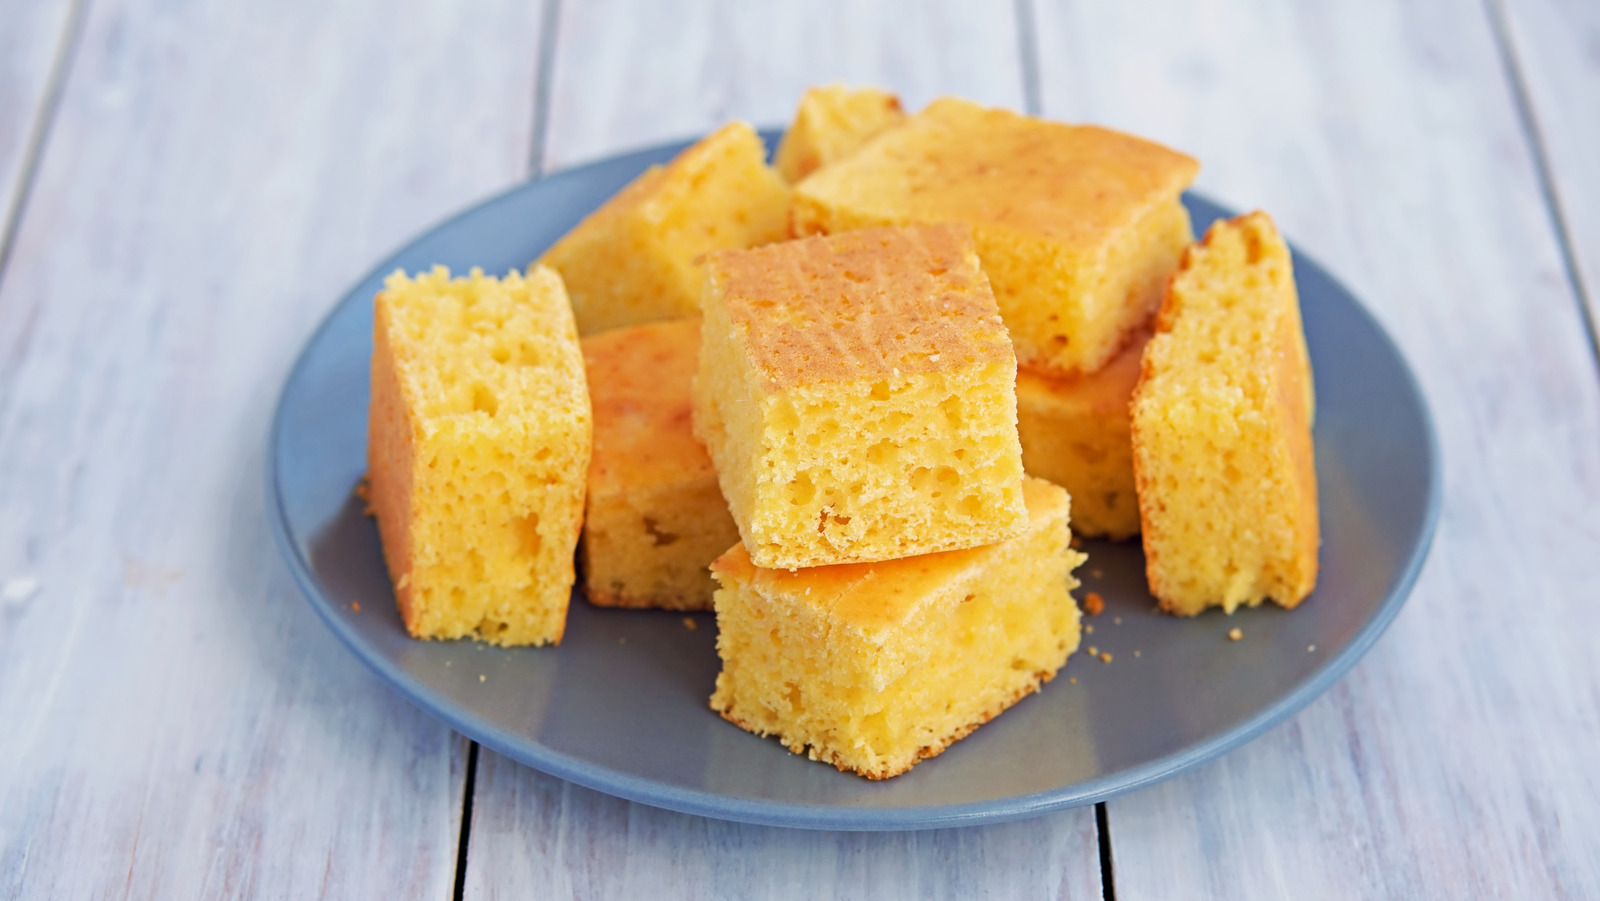 15 Tips You Need For The Absolute Best Cornbread – Tasting Table